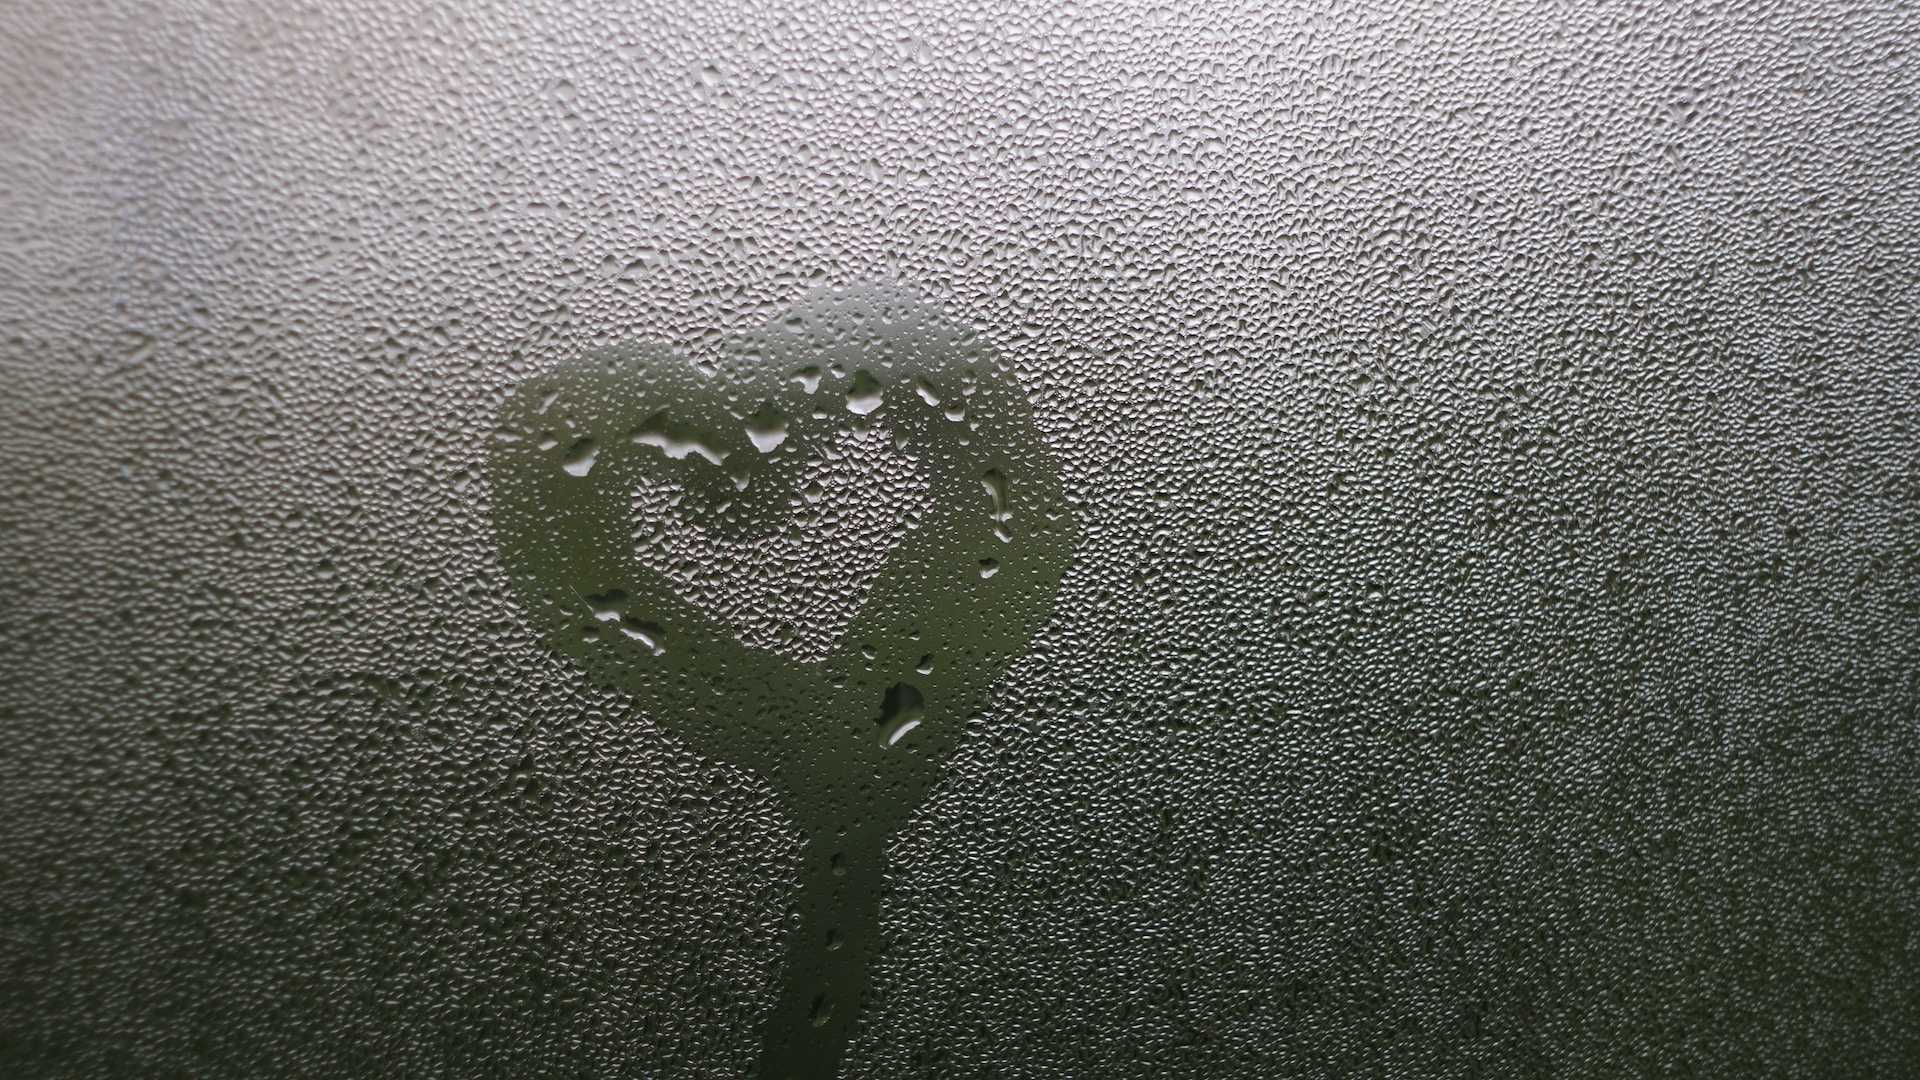 heart drawn in a wet glass surface as a miss you love message